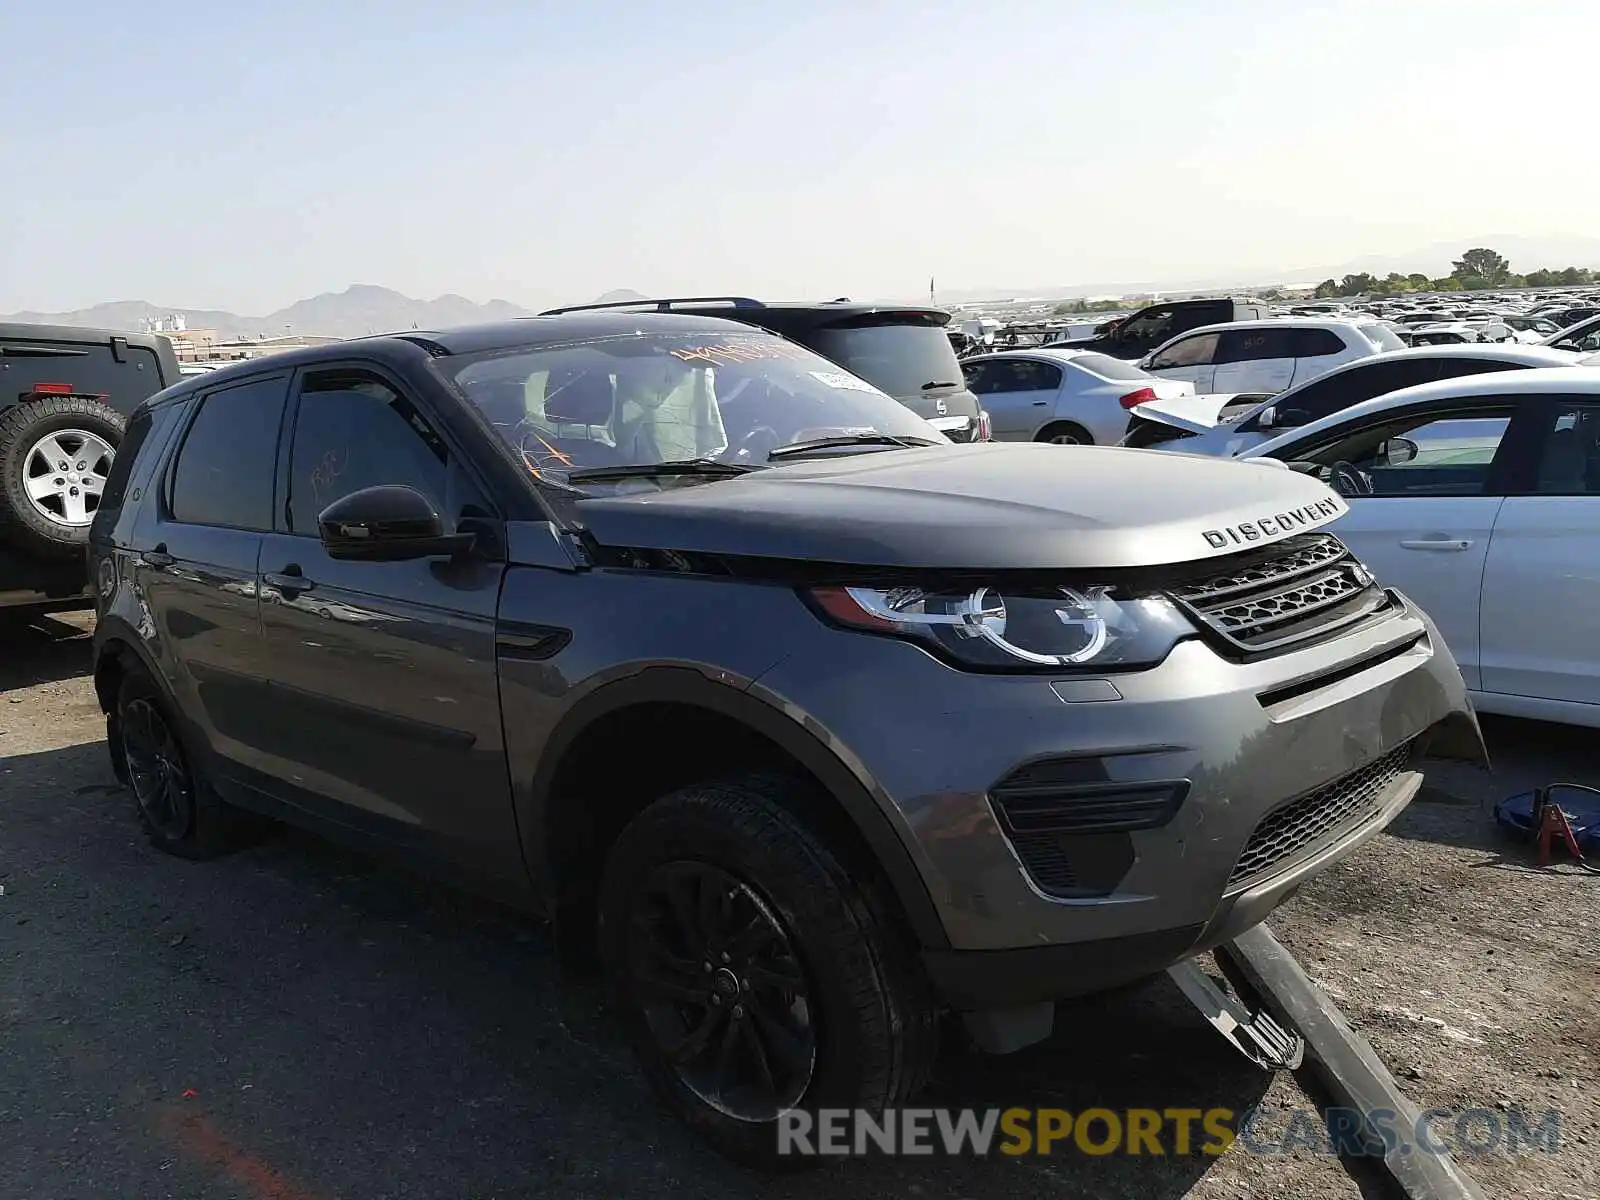 1 Photograph of a damaged car SALCP2FXXKH795192 LAND ROVER DISCOVERY 2019